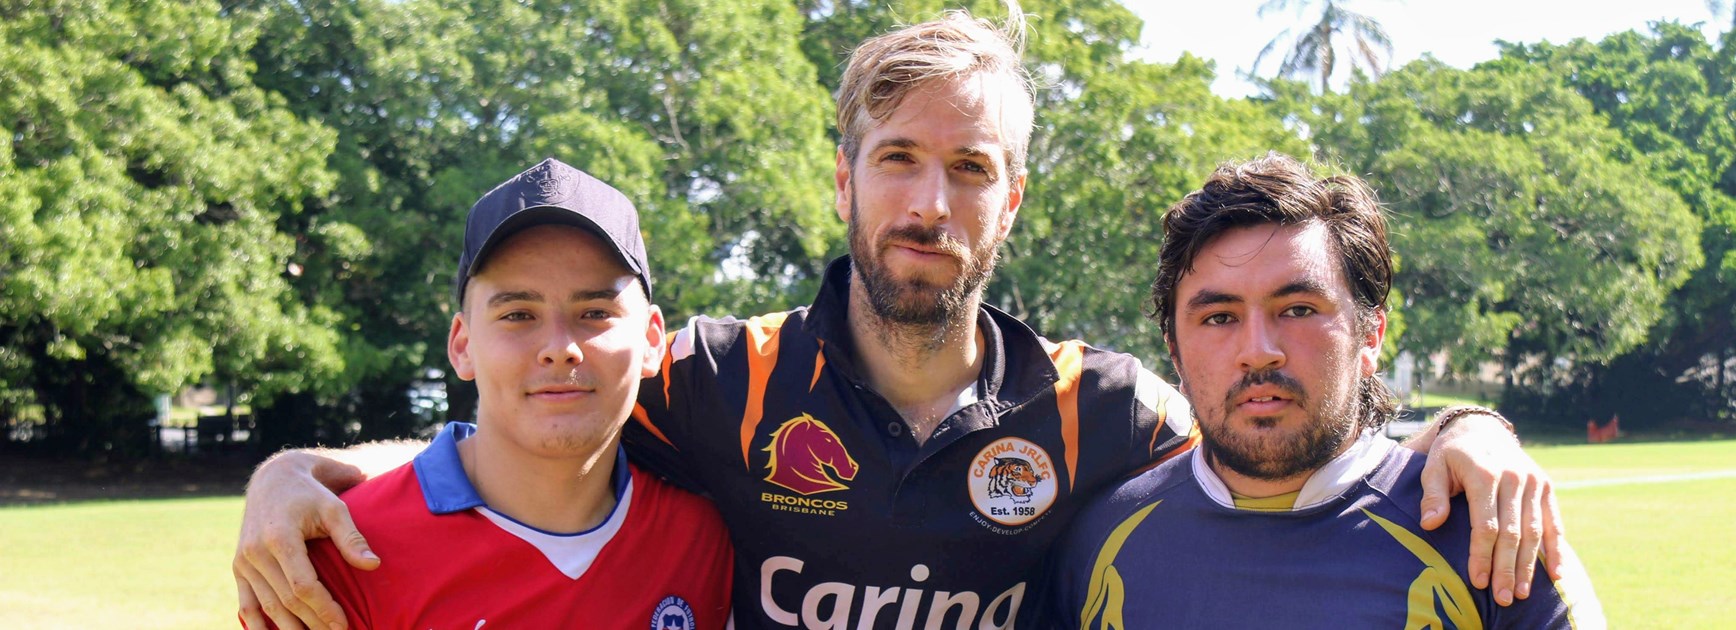 The Chilean who learnt league in remote Cape York